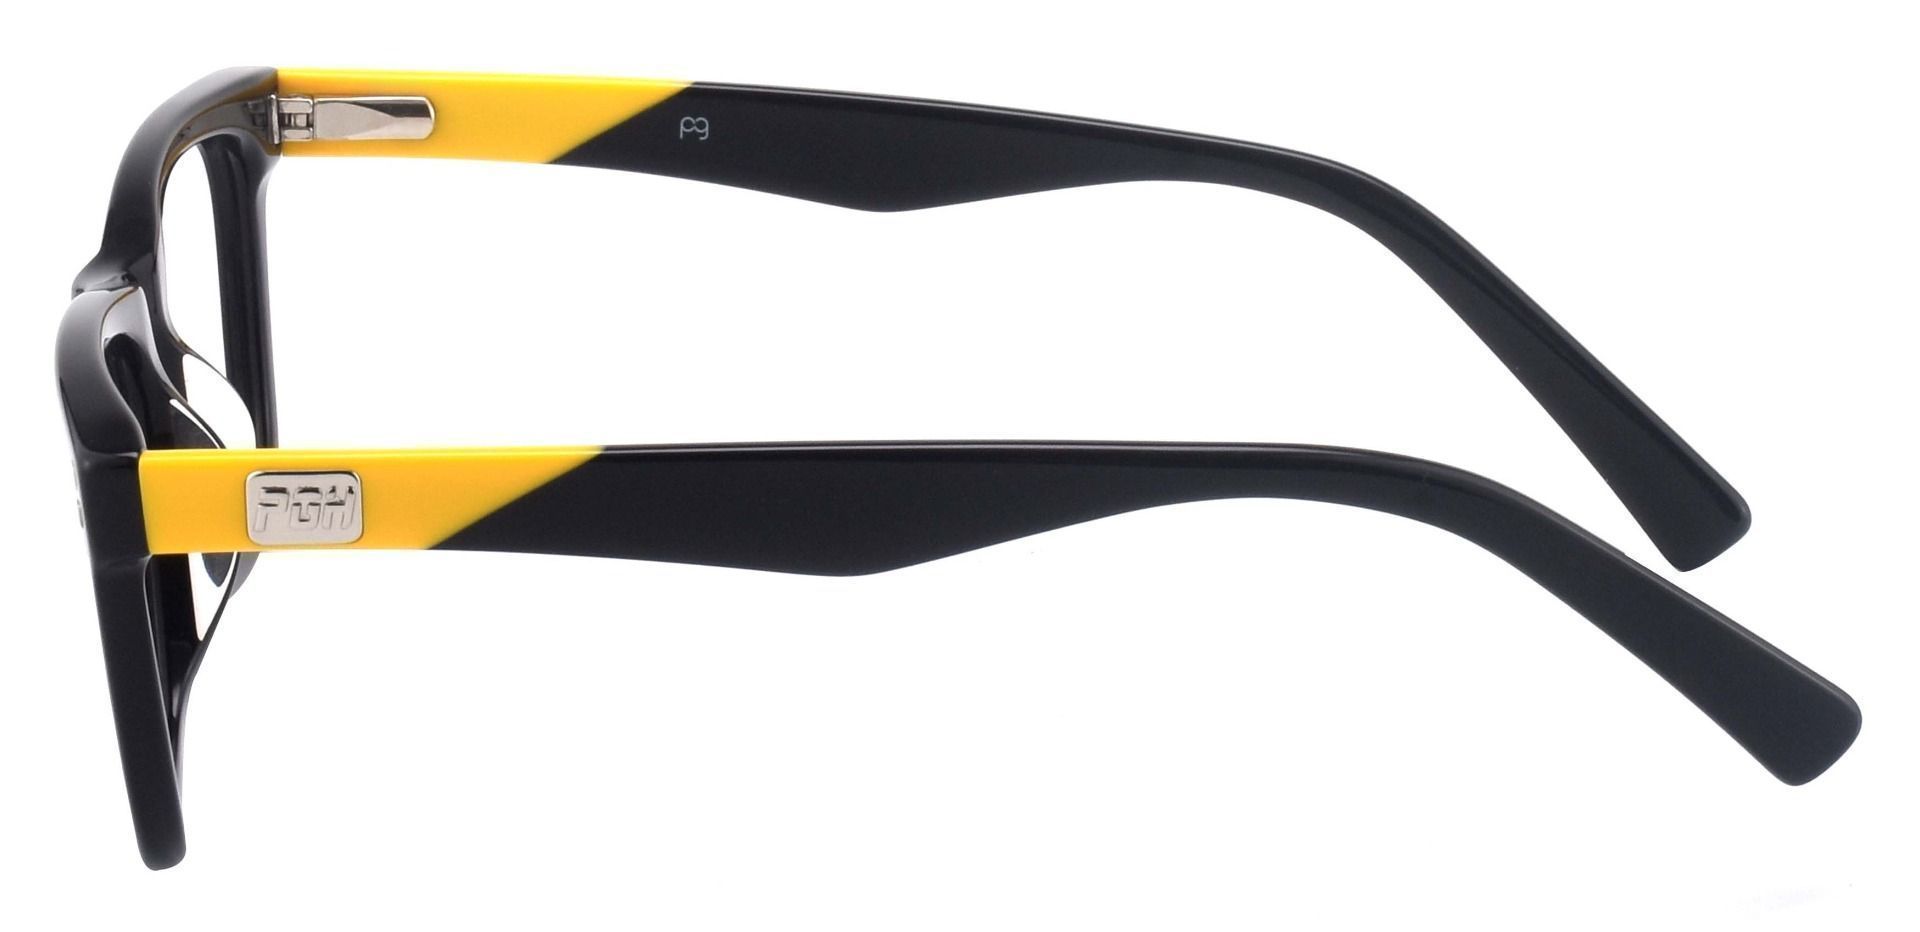 Blitz Rectangle Non-Rx Glasses - The Frame Is Black And Yellow